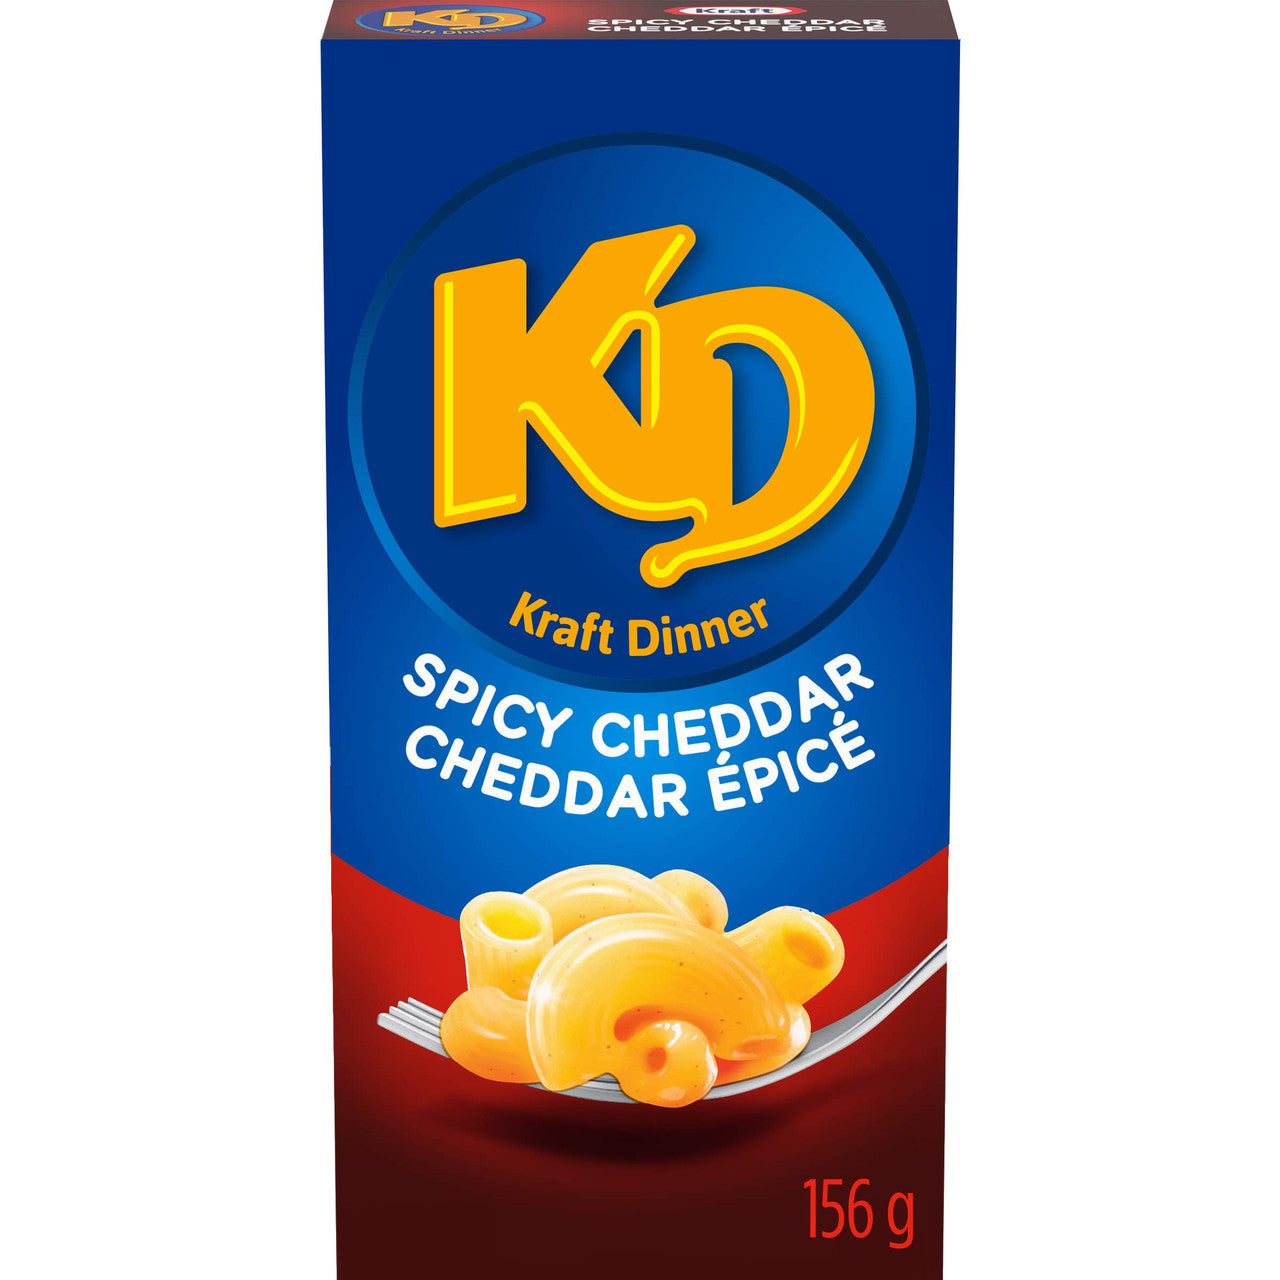 Kraft Dinner Spicy Cheddar Macaroni & Cheese, 156g (Pack of 12), {Imported from Canada}